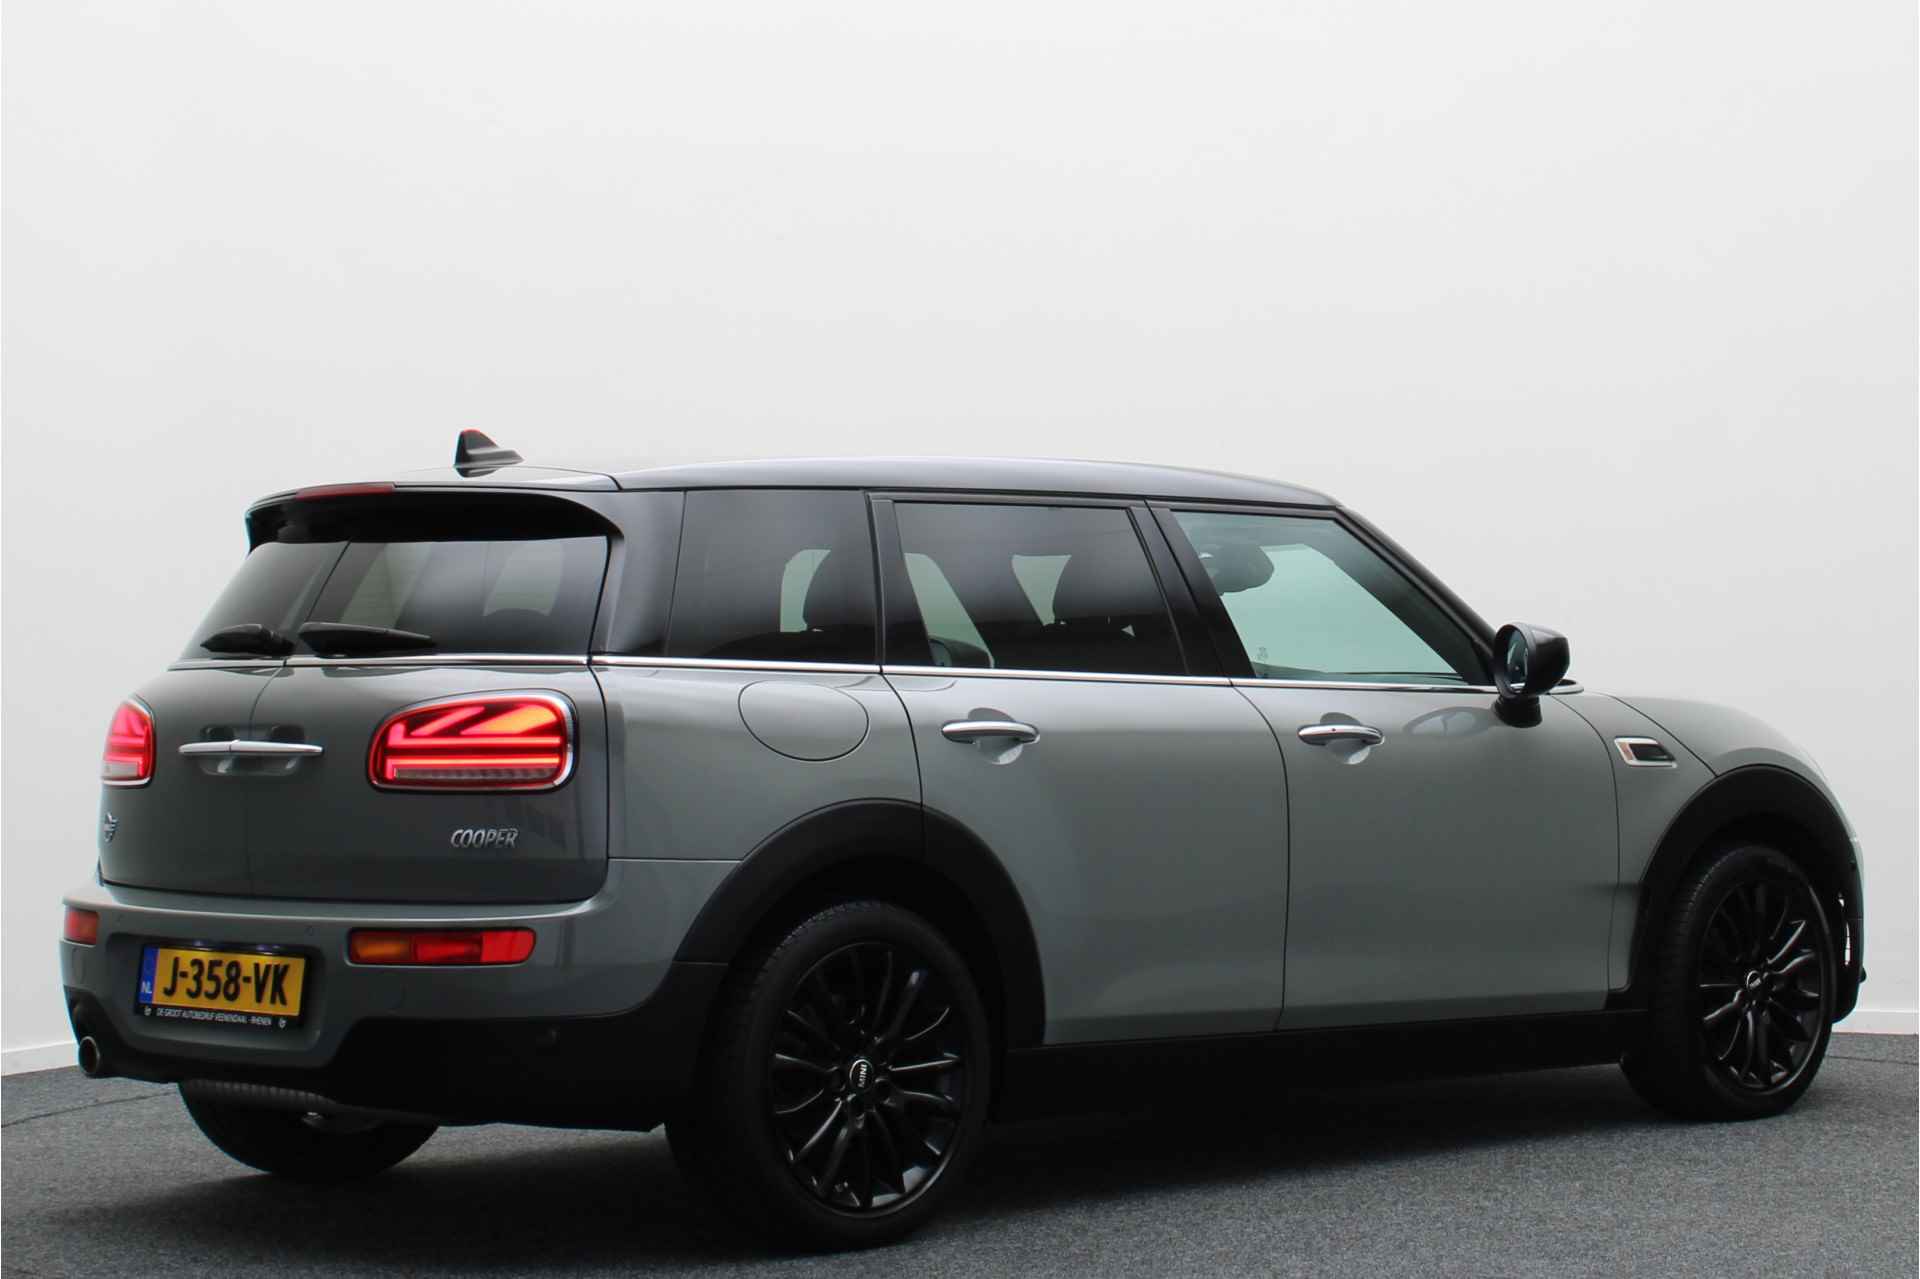 MINI Clubman 1.5 Cooper Business Edition Automaat LED, Keyless, Two-Tone lak, Navigatie, Cruise, PDC, Climate, 17” - 18/44